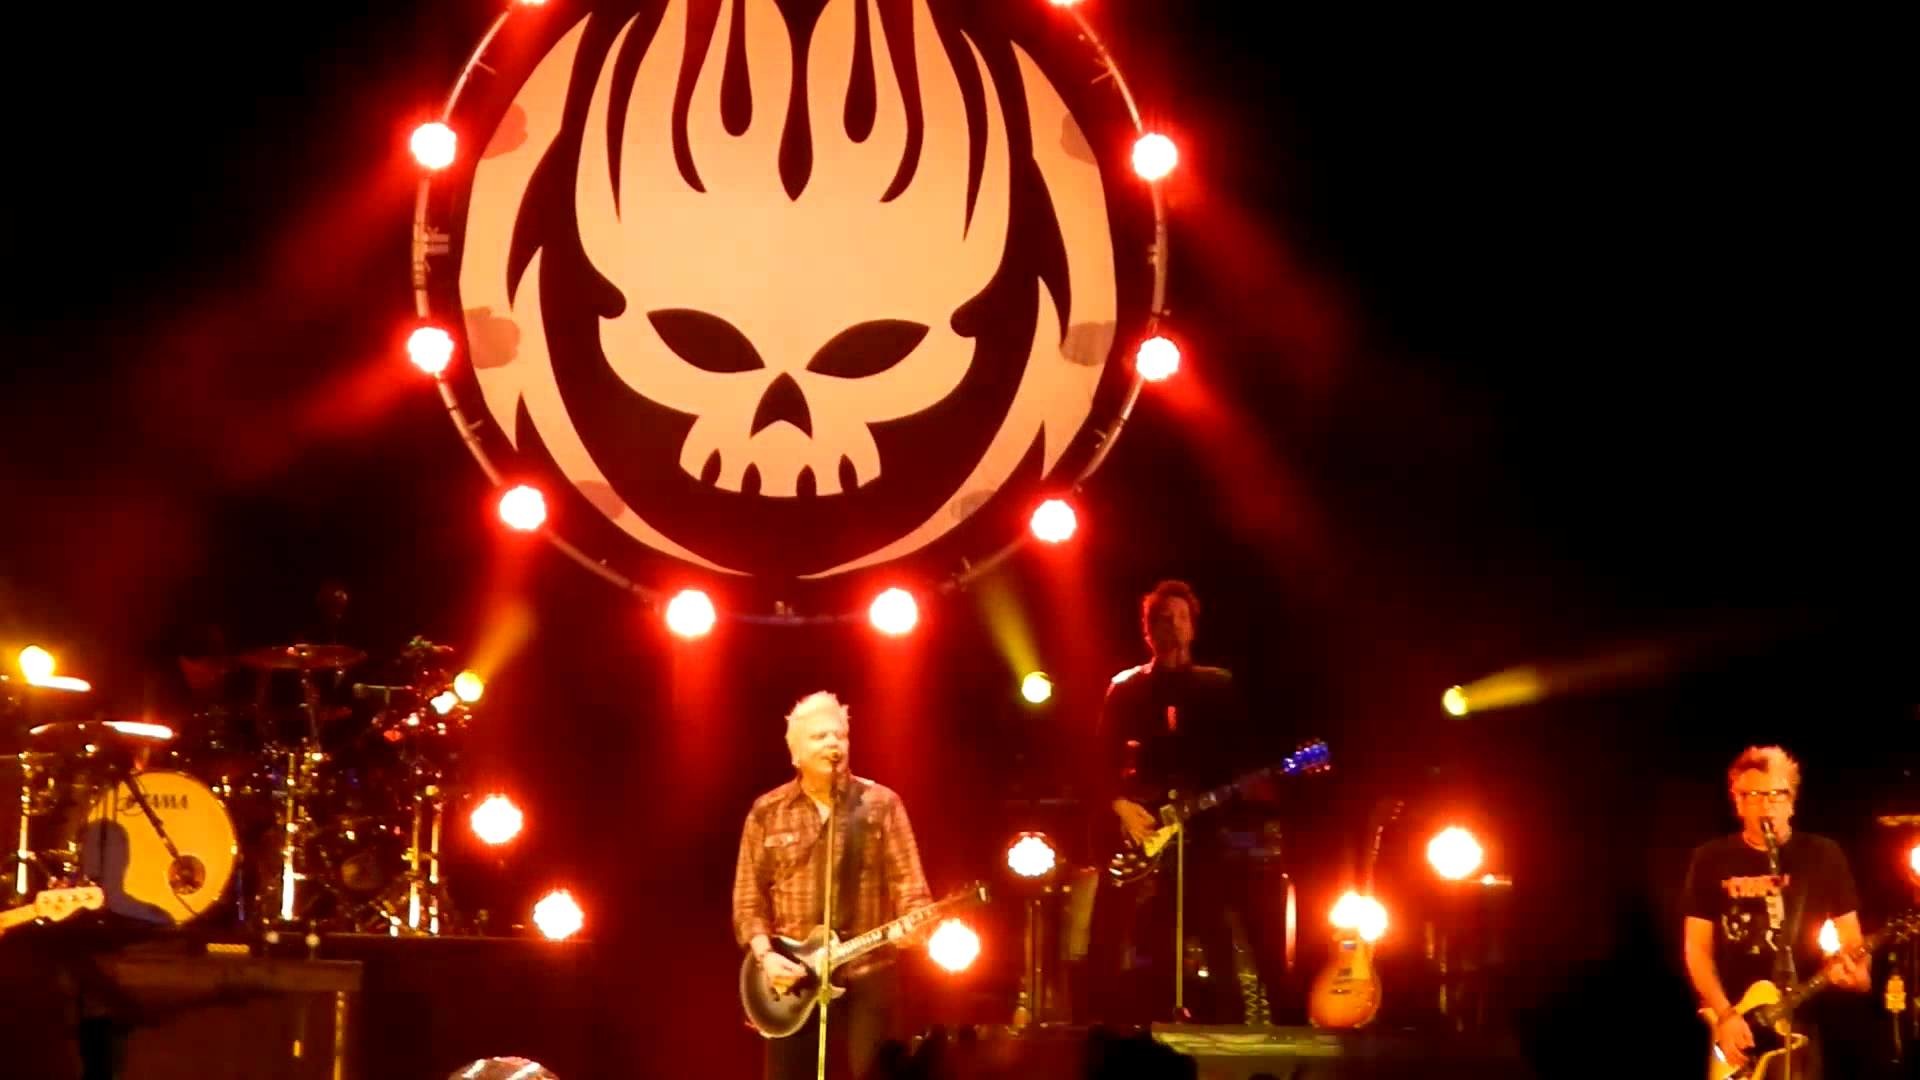 1920x1080 The Offspring-Staring at the Sun HD(LIVE) Soundwave Melbourne 2013 - YouTube